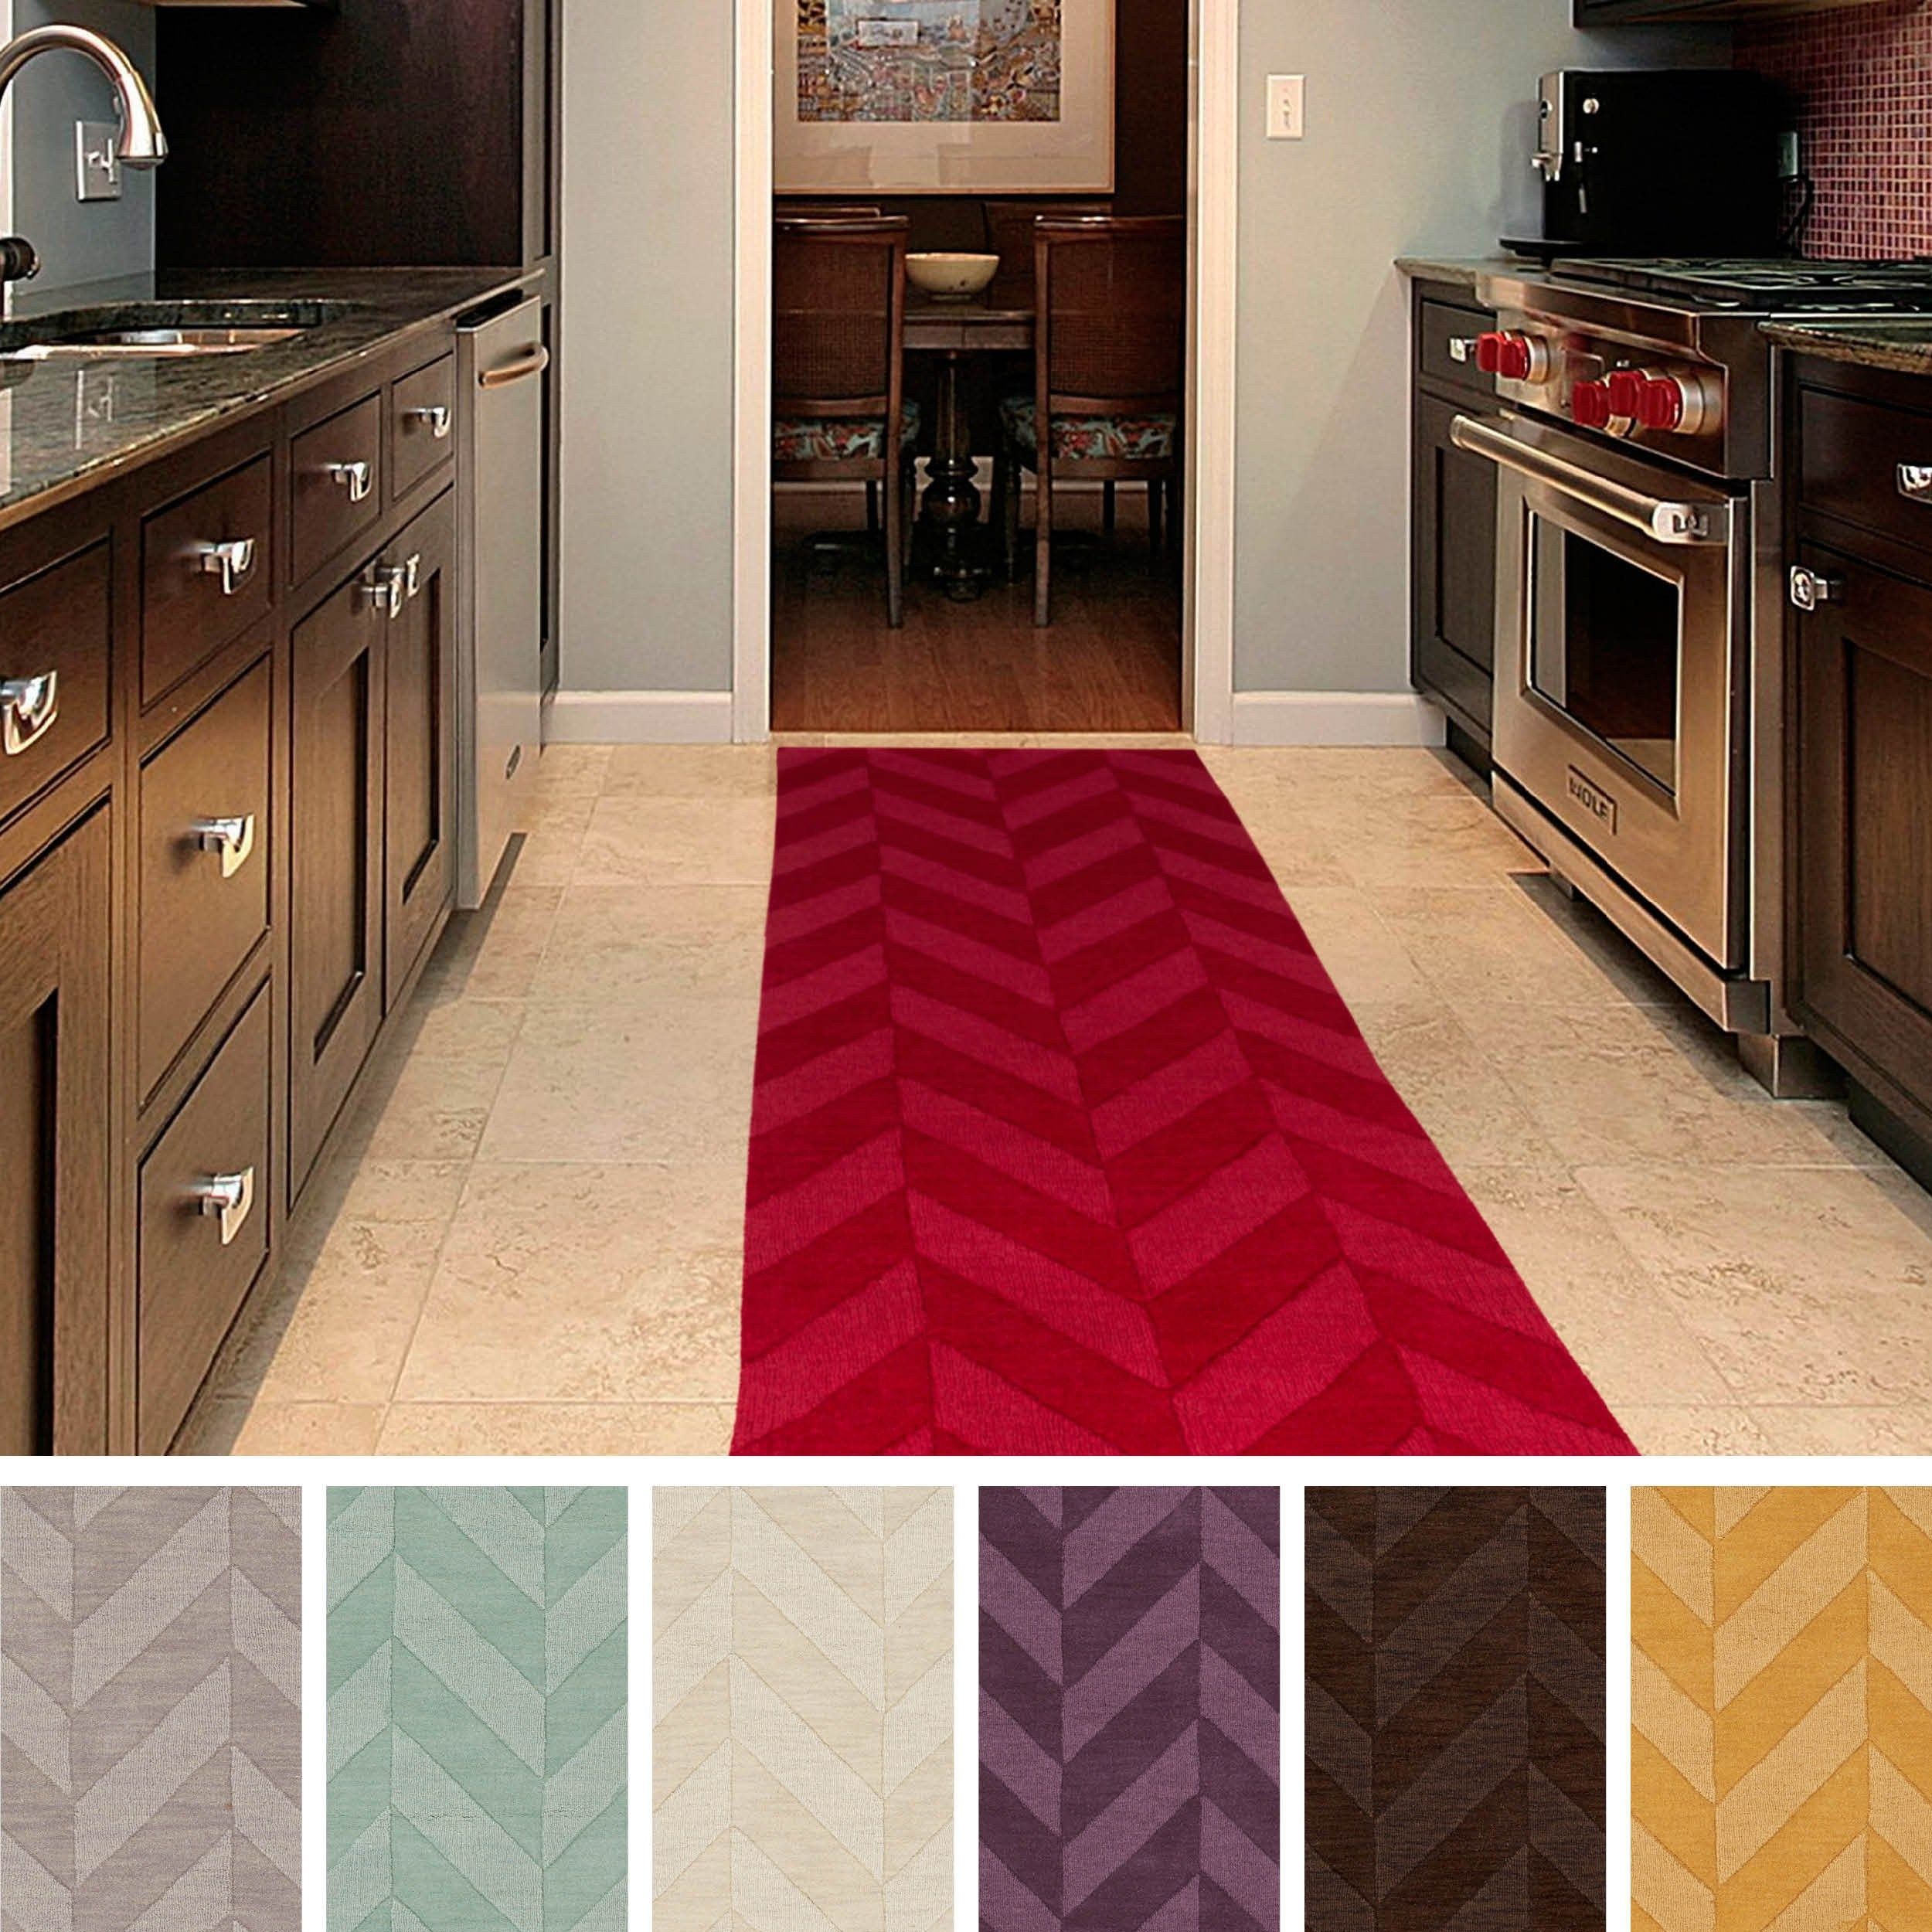 Kitchen Runner Rugs Source Kitchen Rug Runner Red Kilim Rugs Pertaining To Hallway Runners And Rugs 